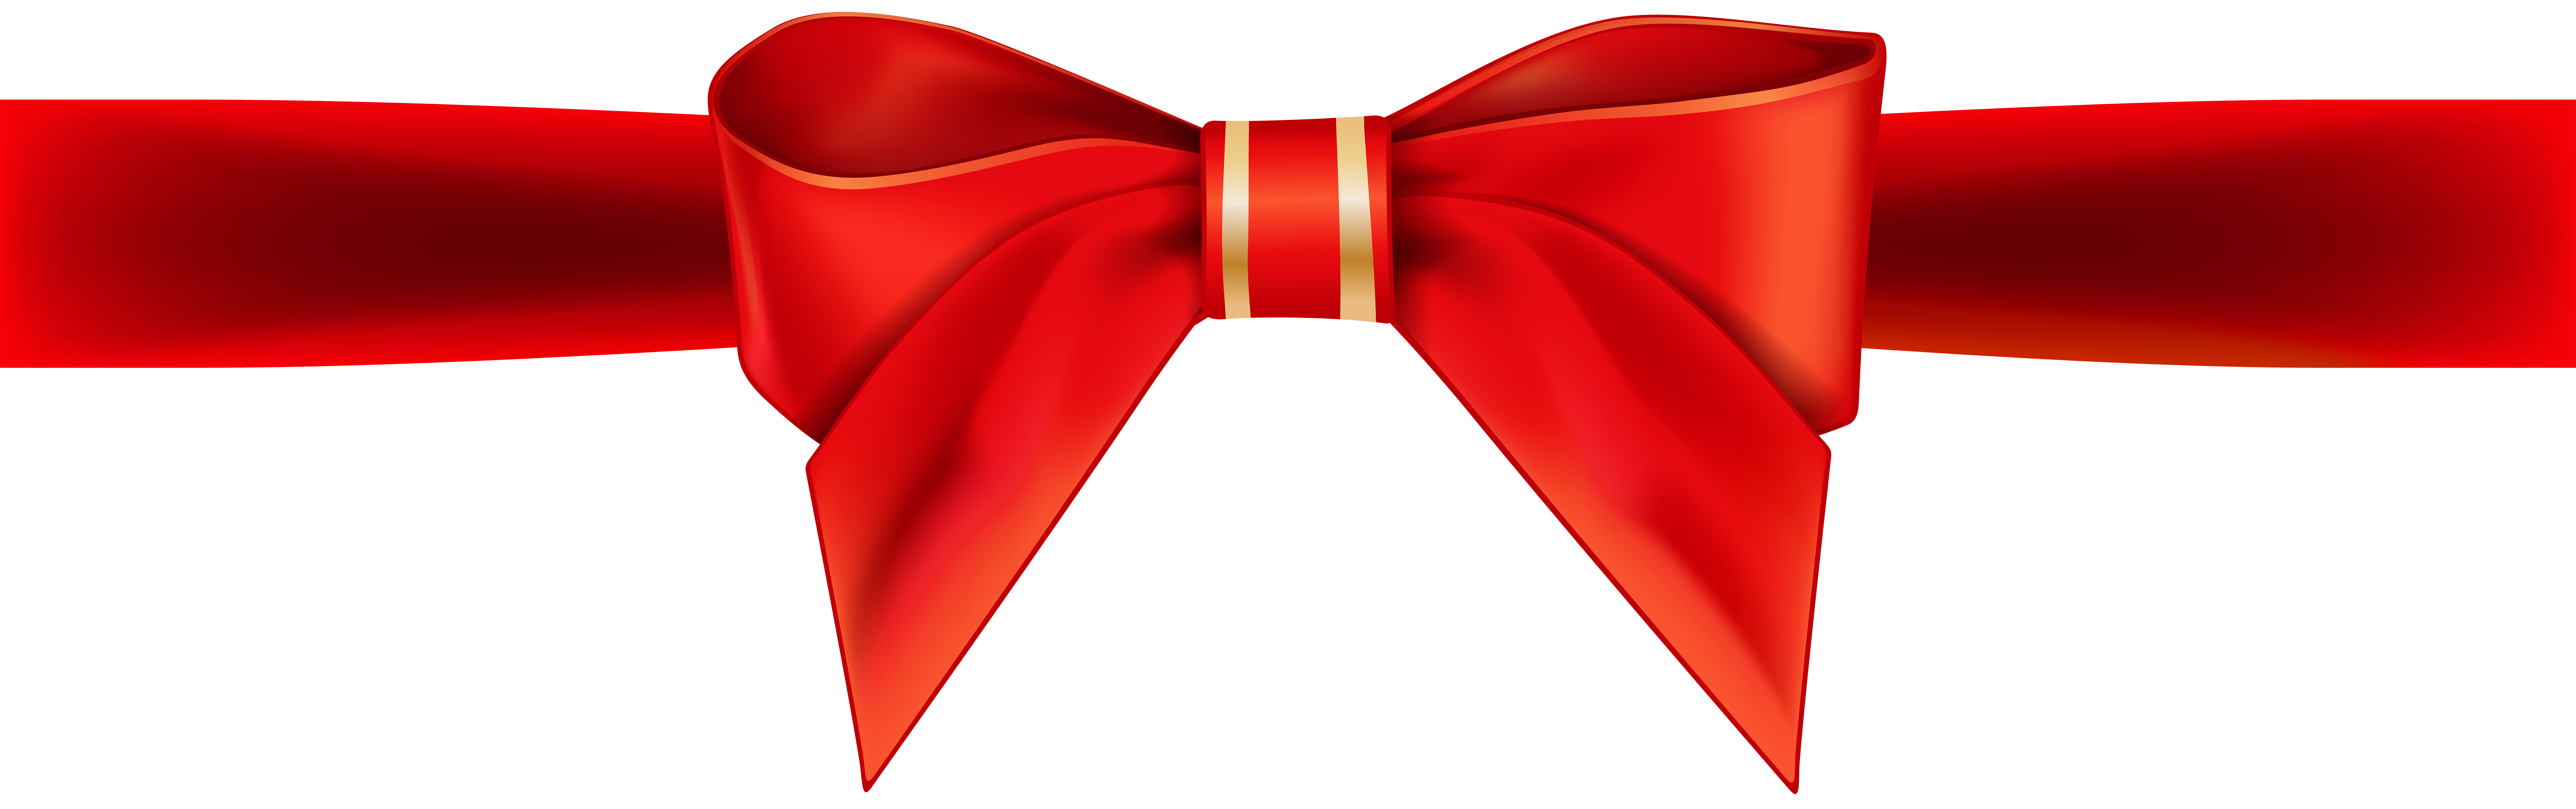 Gold Red Ribbon Transparent Images